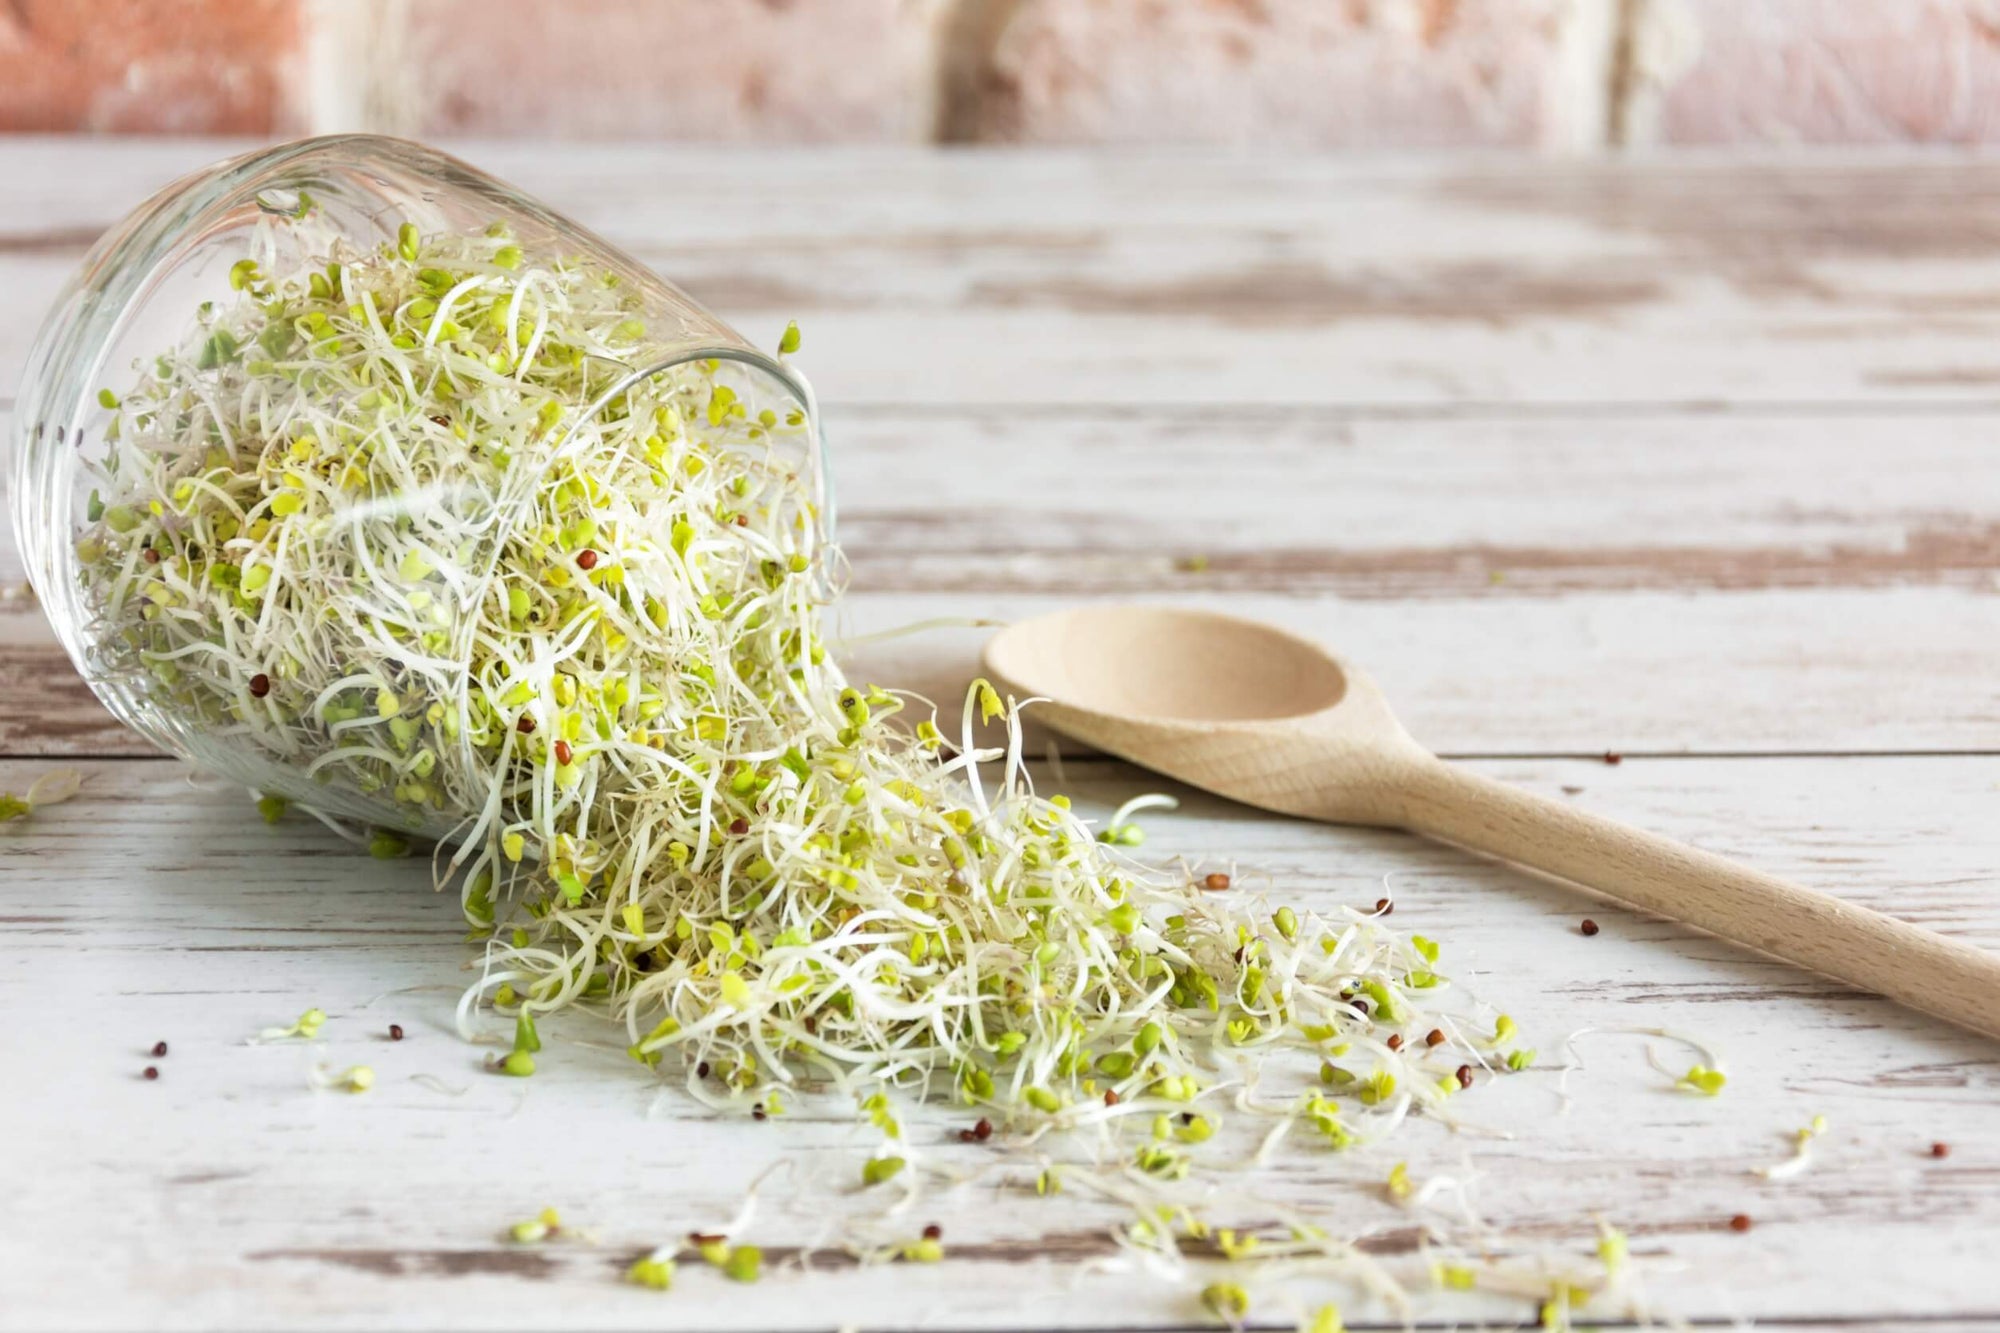 Broccoli Sprouts: The Top Benefits and Uses